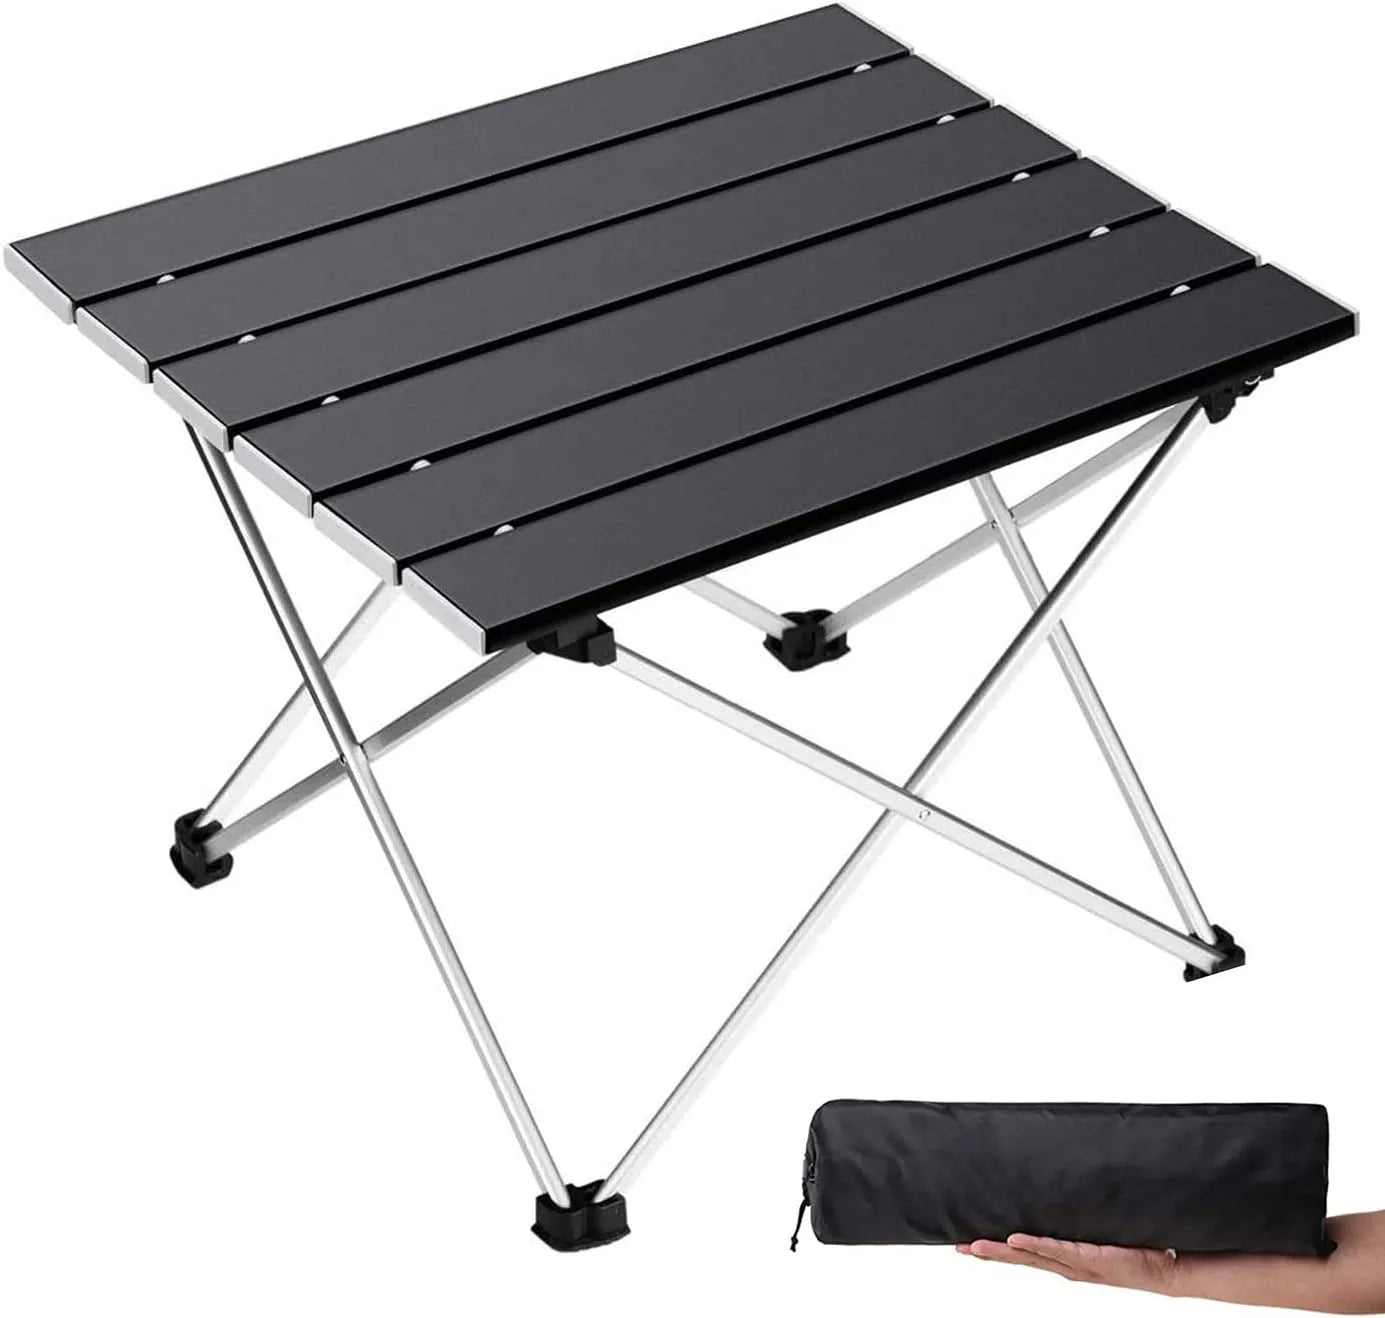 Camping Table Pliante Ultralight Folding Tables For Outdor Hiking Garden Party Dinner Picnic BBQ Foldable Aluminum Desk